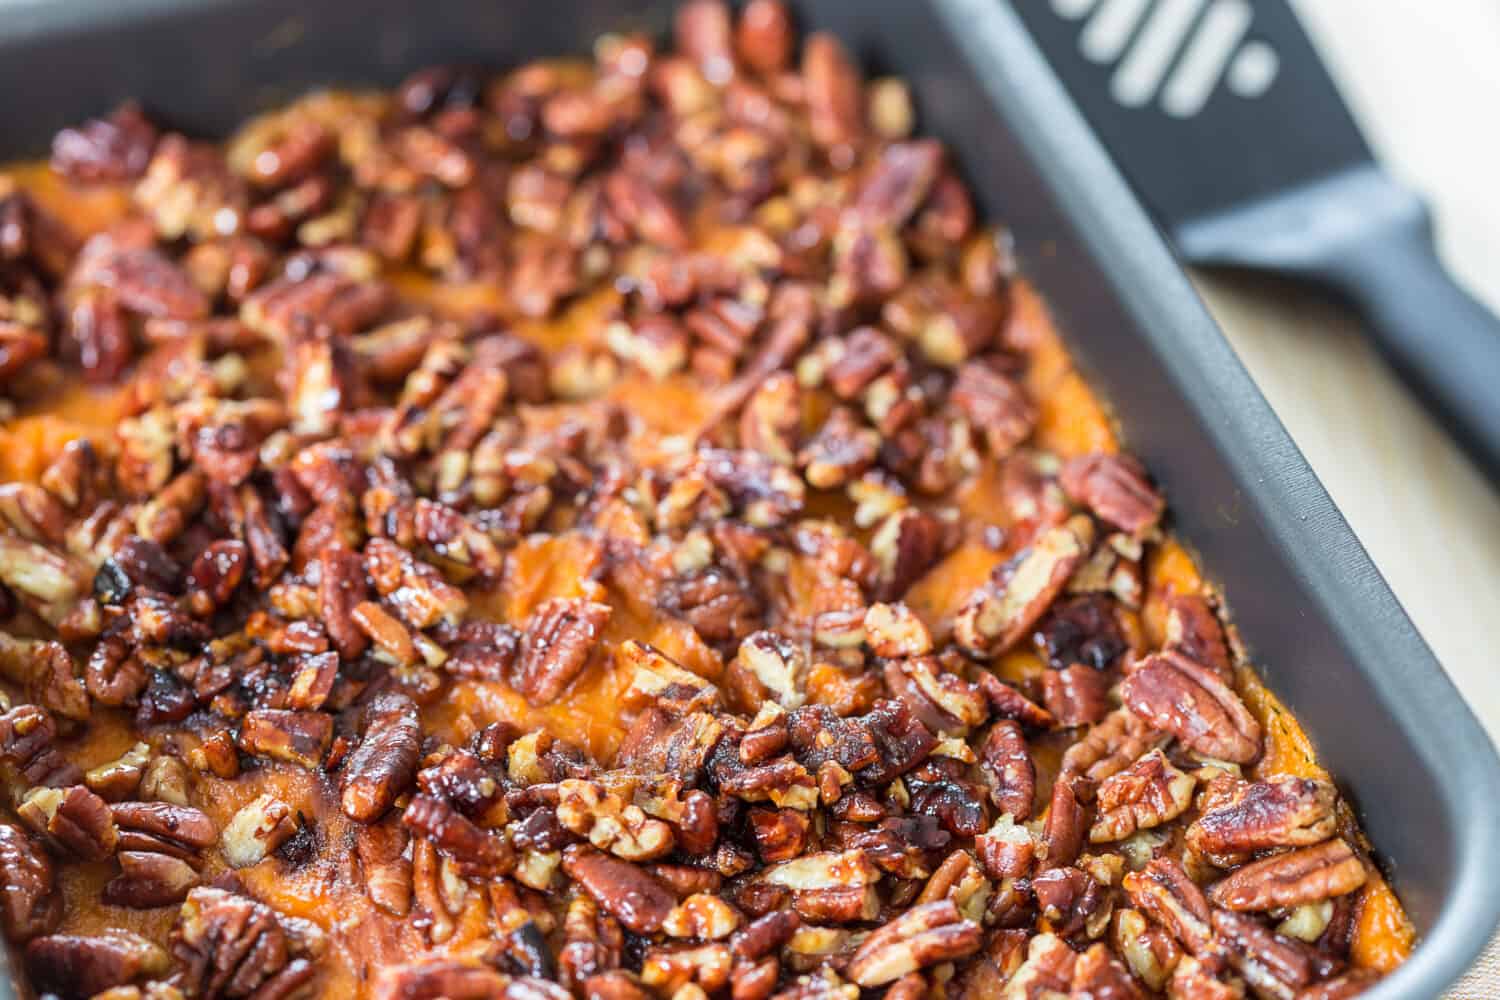 Homemade Mashed Sweet Potato Casserole with Caramelized Pecans for Thanksgiving Day